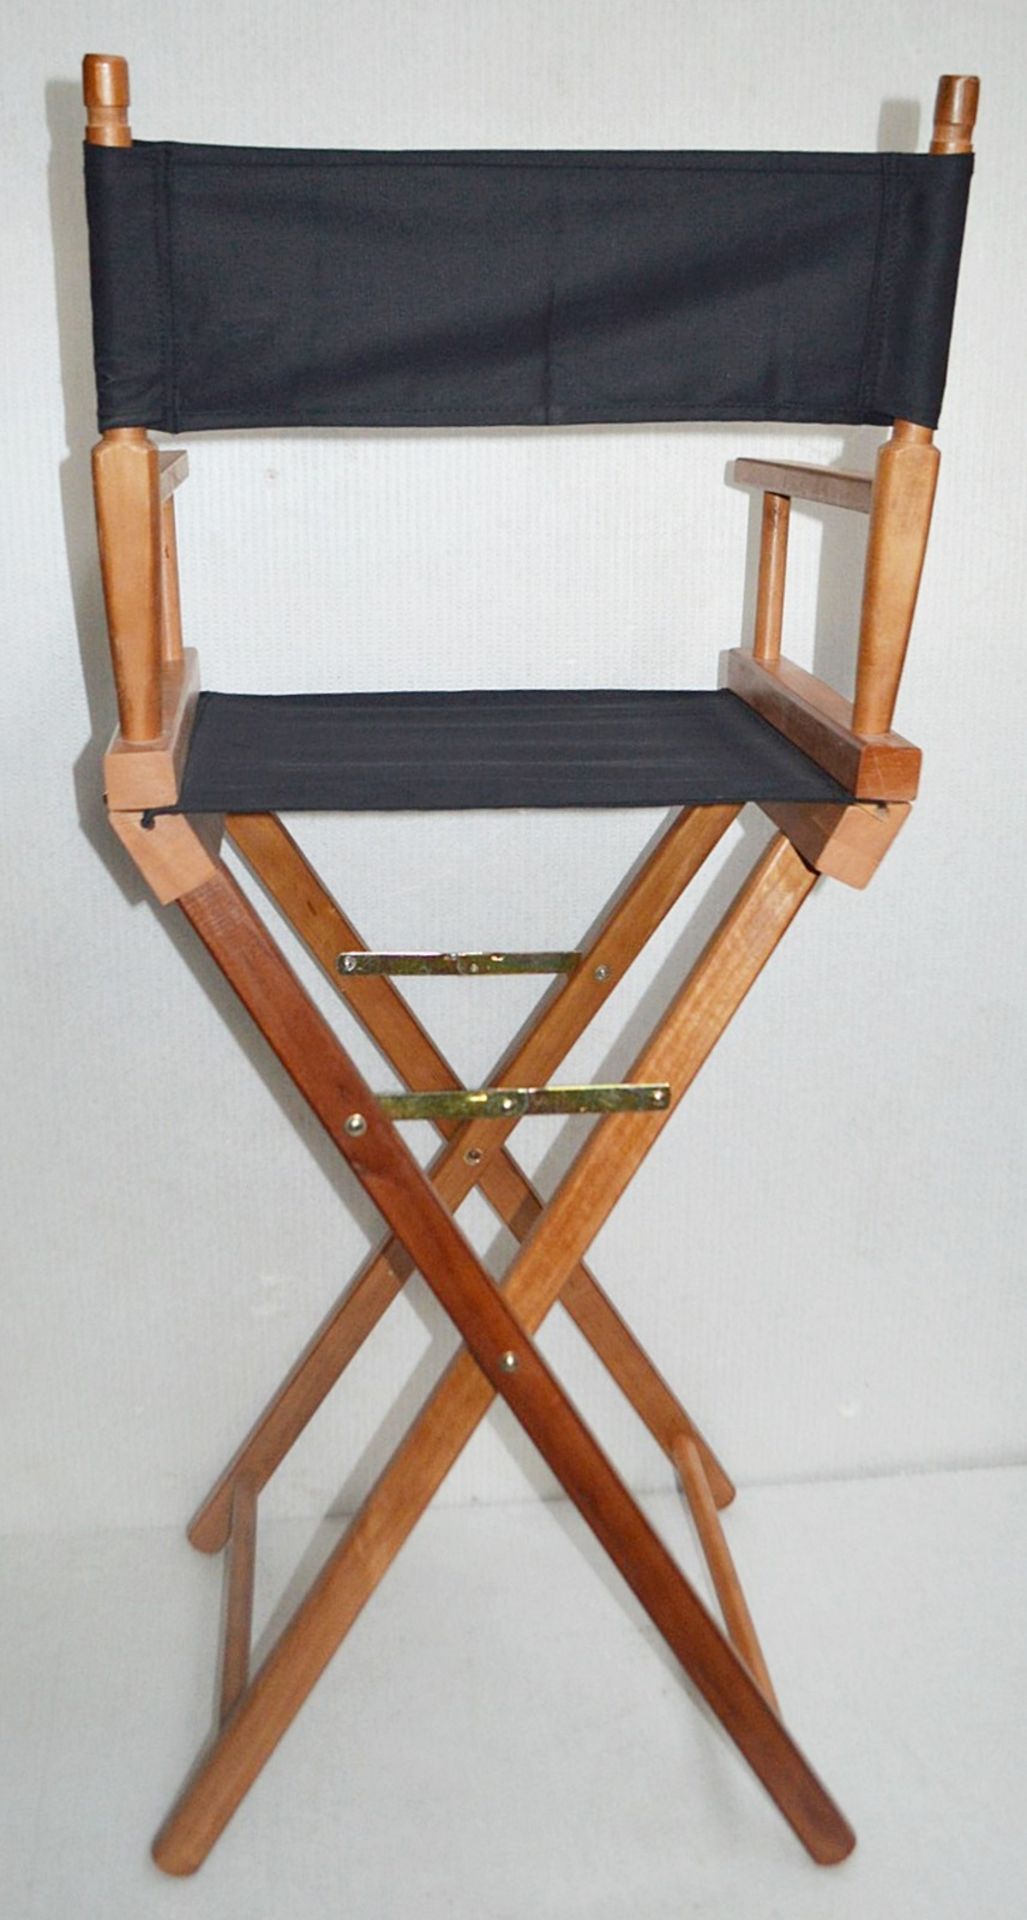 1 x Professional Tall Folding Directors Chair - Ex-Display Prop - Dimensions (Approx): H120 x W52 - Image 4 of 4